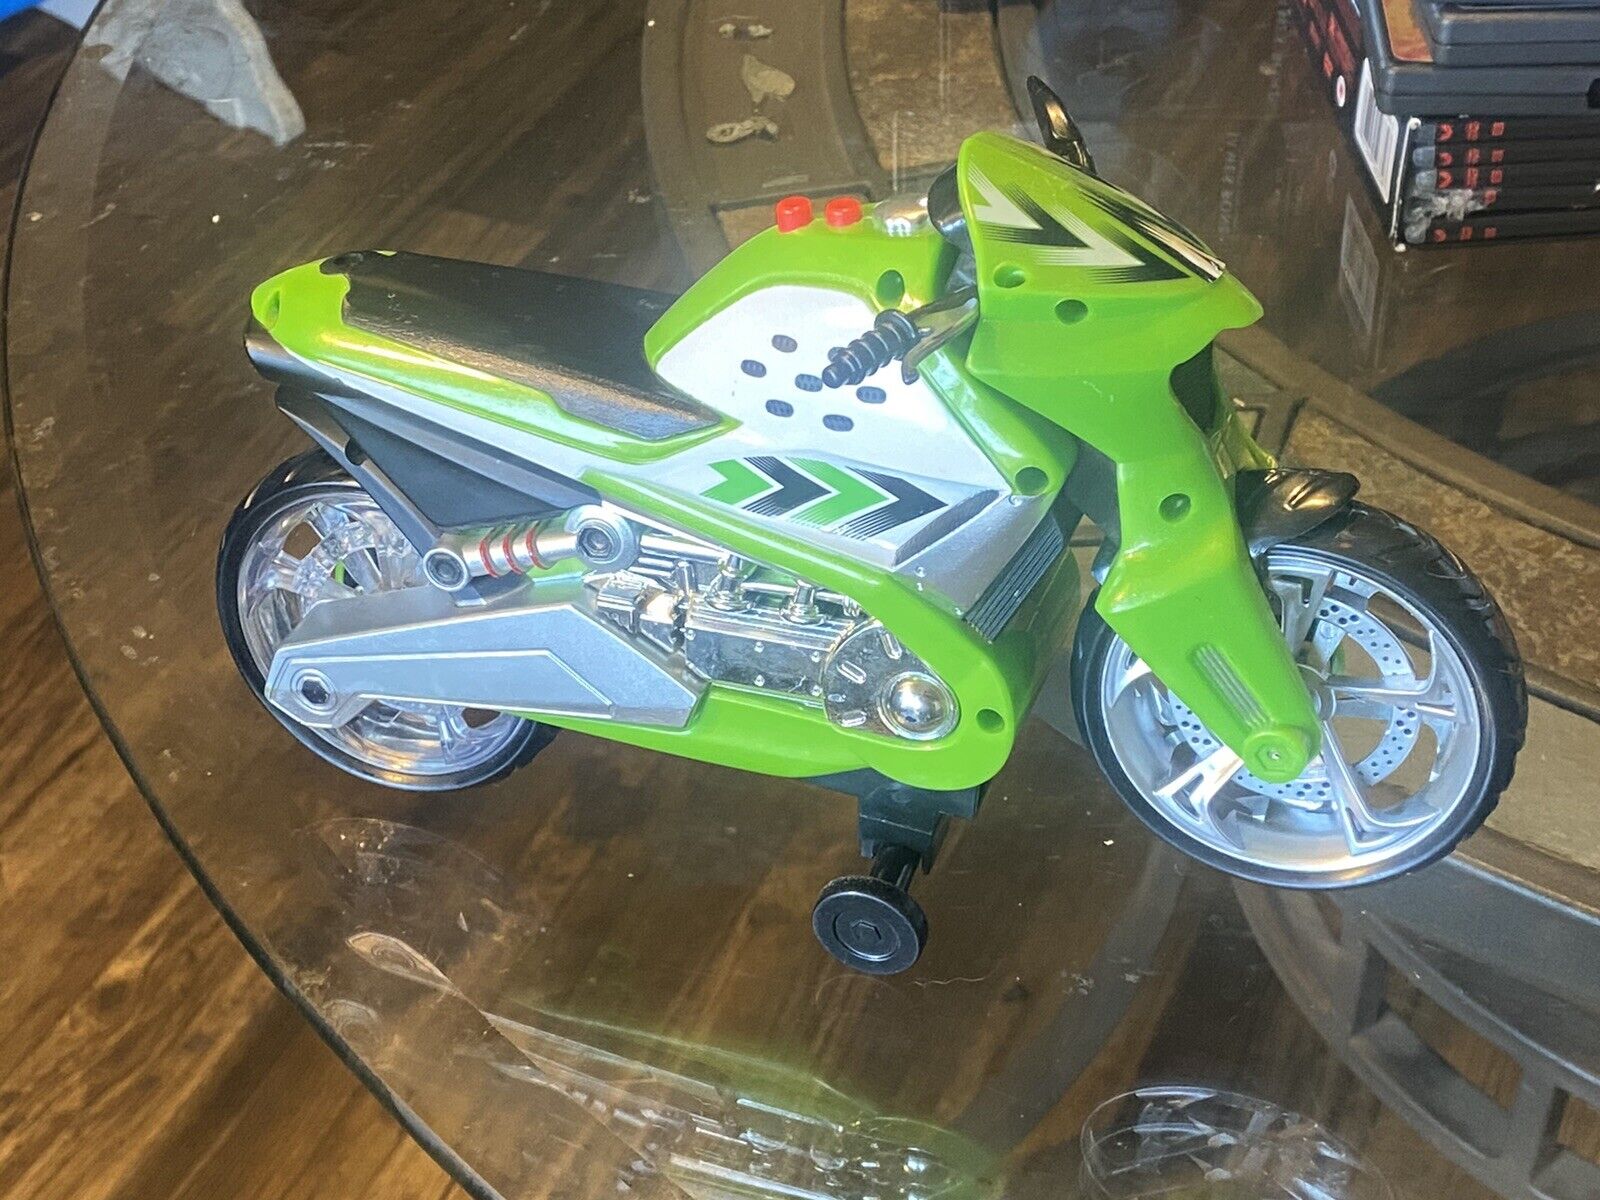 Motorized Toy Motorcycle Sound, Lights, Self Propelled Tested Works Ships Free